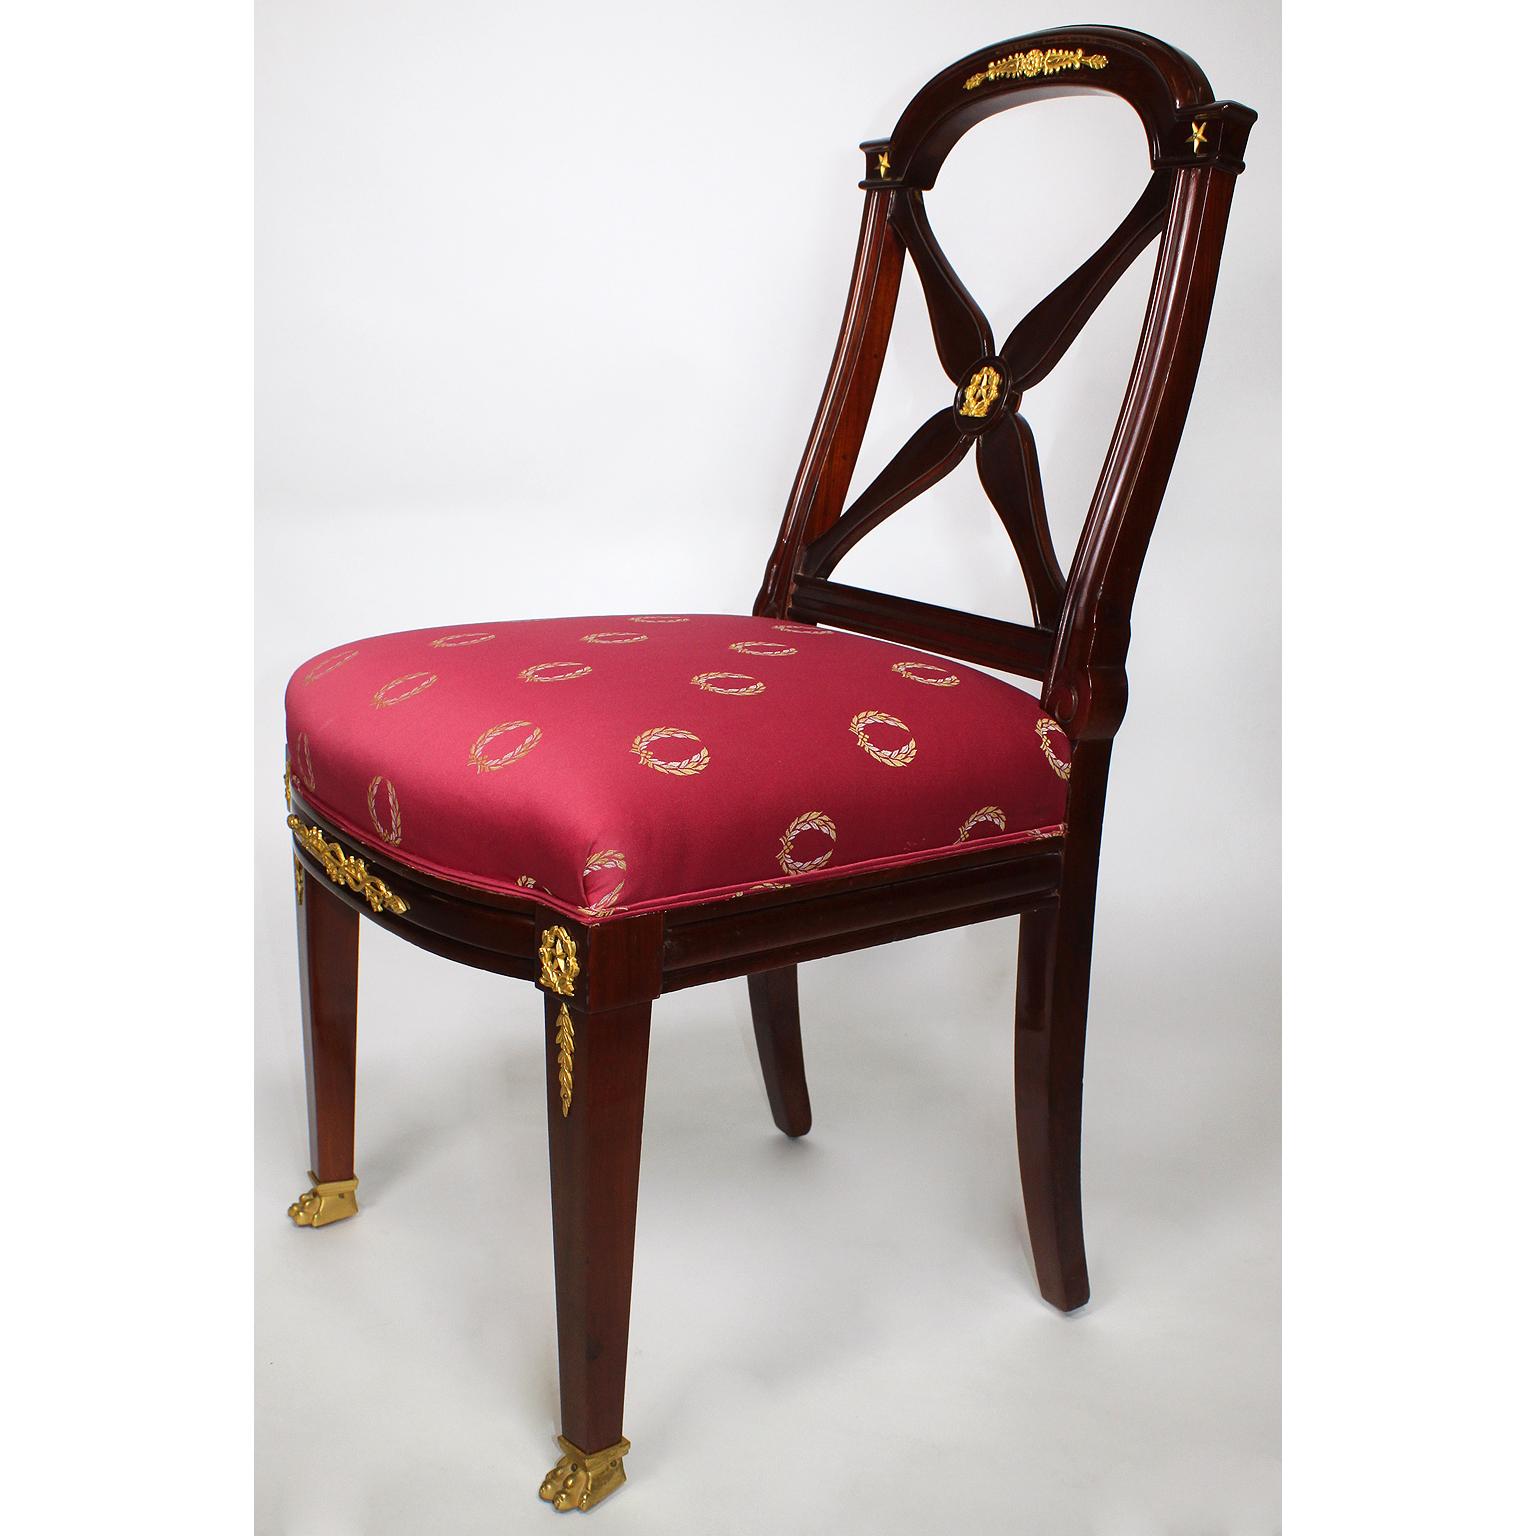 A fine set of ten 19th century French Empire Napoleon III mahogany and gilt bronze-mounted dining chairs by Jeanselme Pere & Fils. The slender mahogany frames with an arched cross-banded back, surmounted with gilt bronze mounts allegorical to the